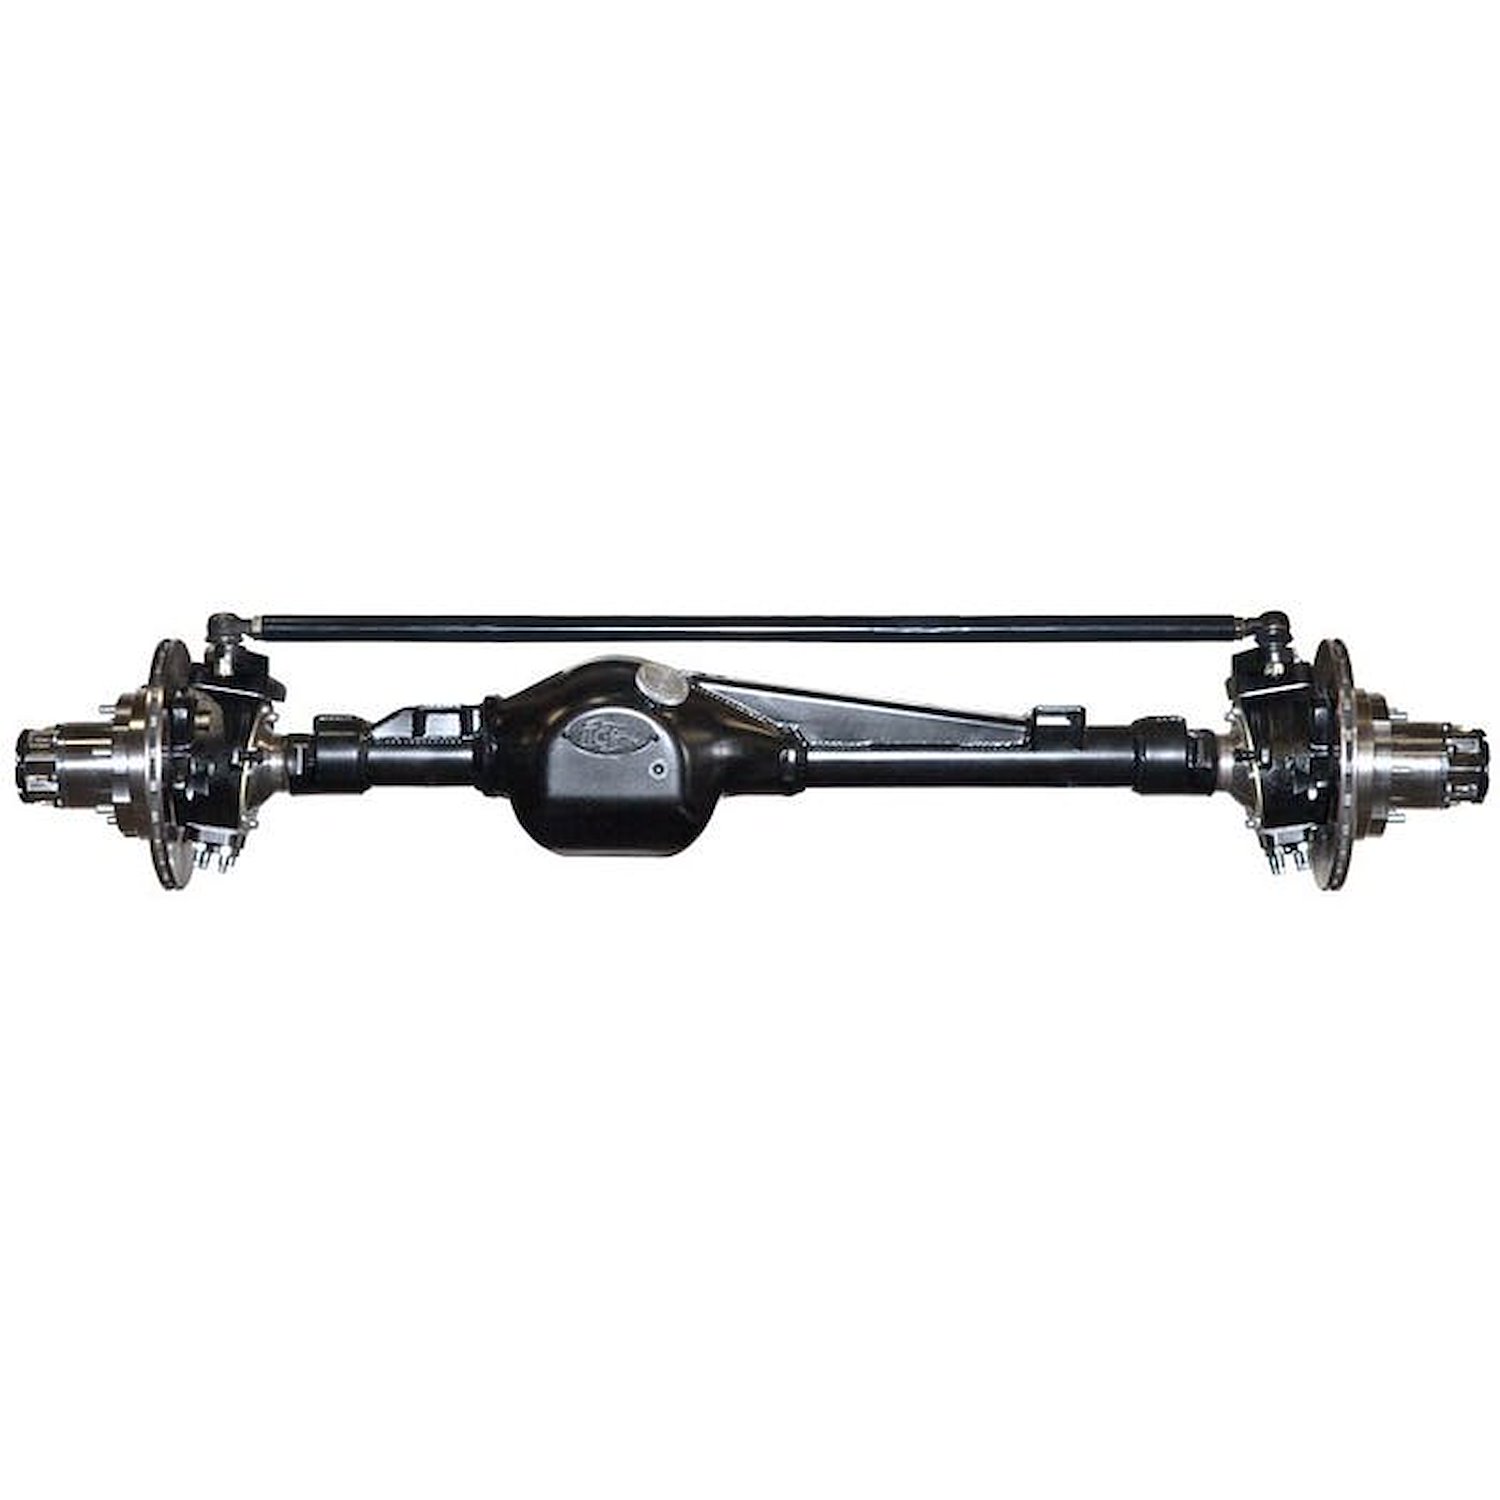 301639-1-KIT Rock Assault Fully-Built Front Axles, +5 Width, LHD, 4-Cylinder, 4.88, Grizzly, Locking Hubs, Toyota